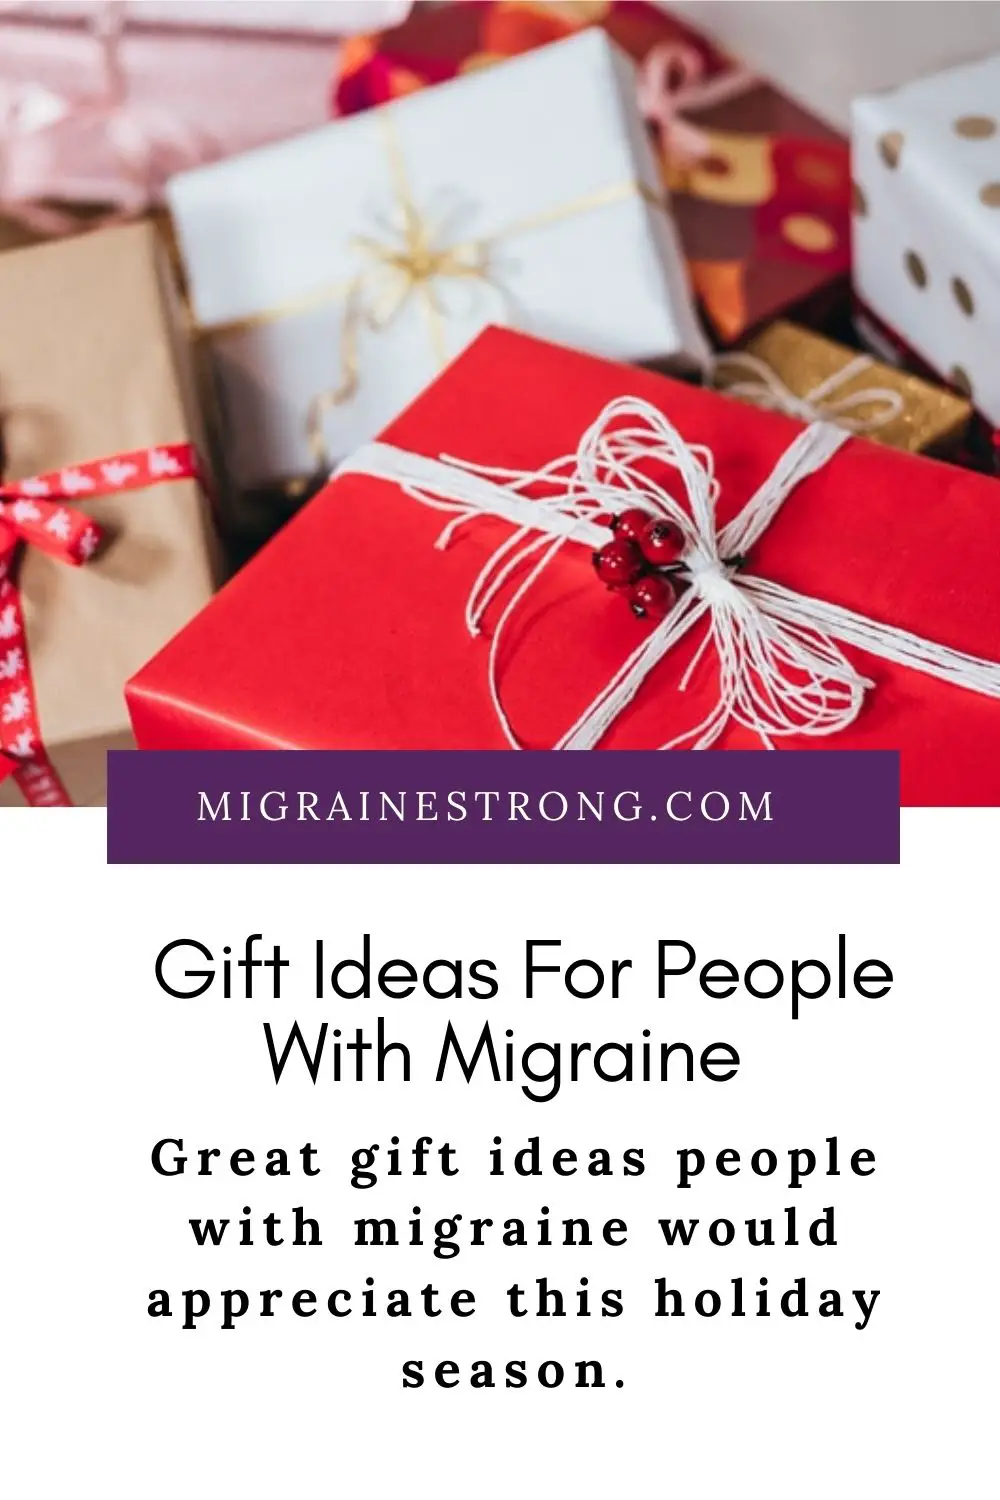 Top Gift Ideas For People With Migraine